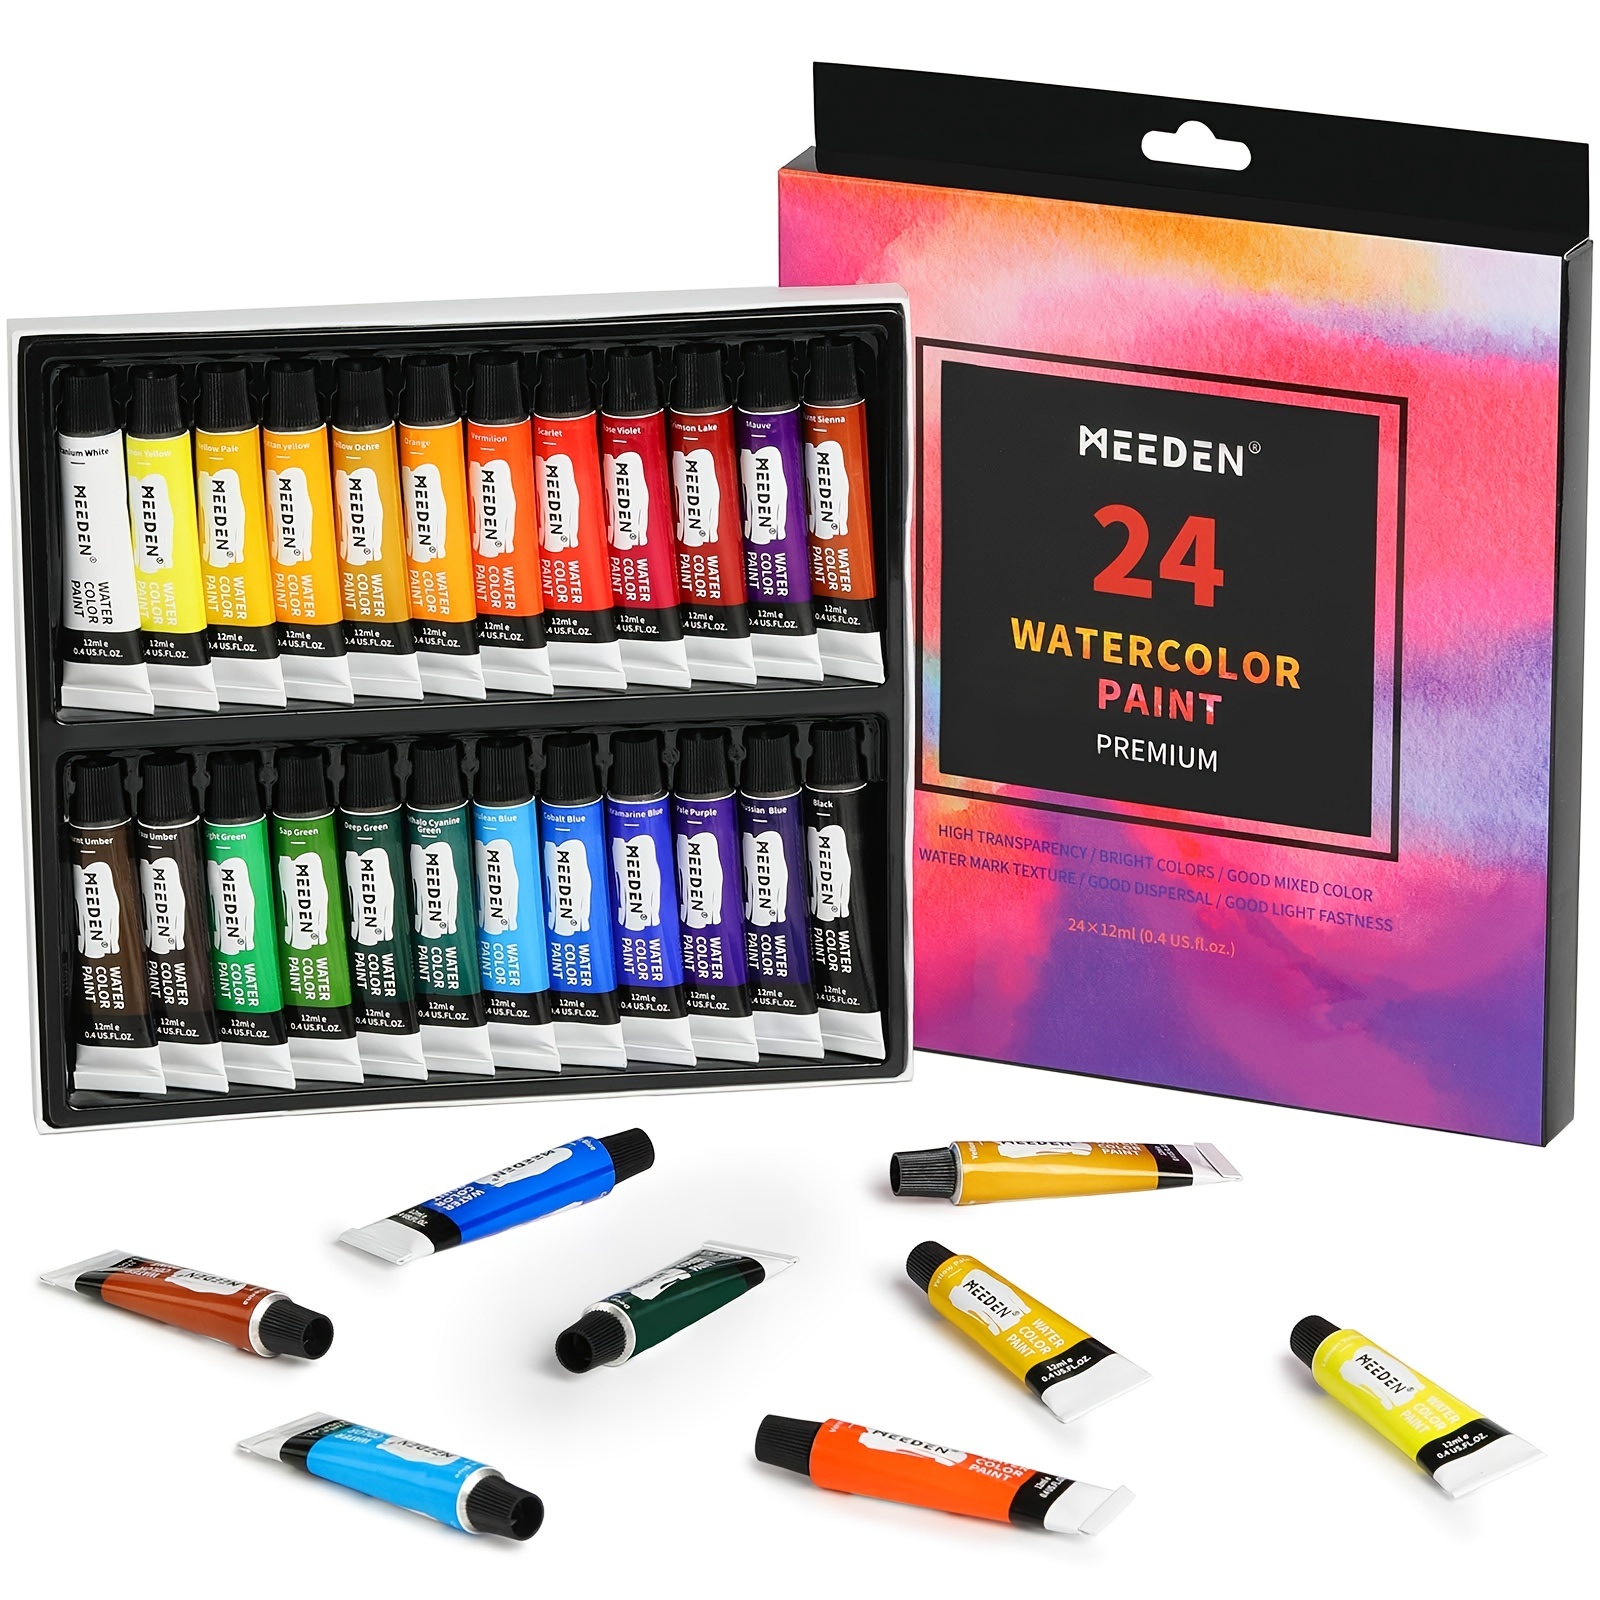 VEESA Watercolor Paint Set, 50 Colors in Portable Tin Box, Perfect Travel Watercolor Set for Kids, Beginners, Amateur Hobbyists and Painting Lovers